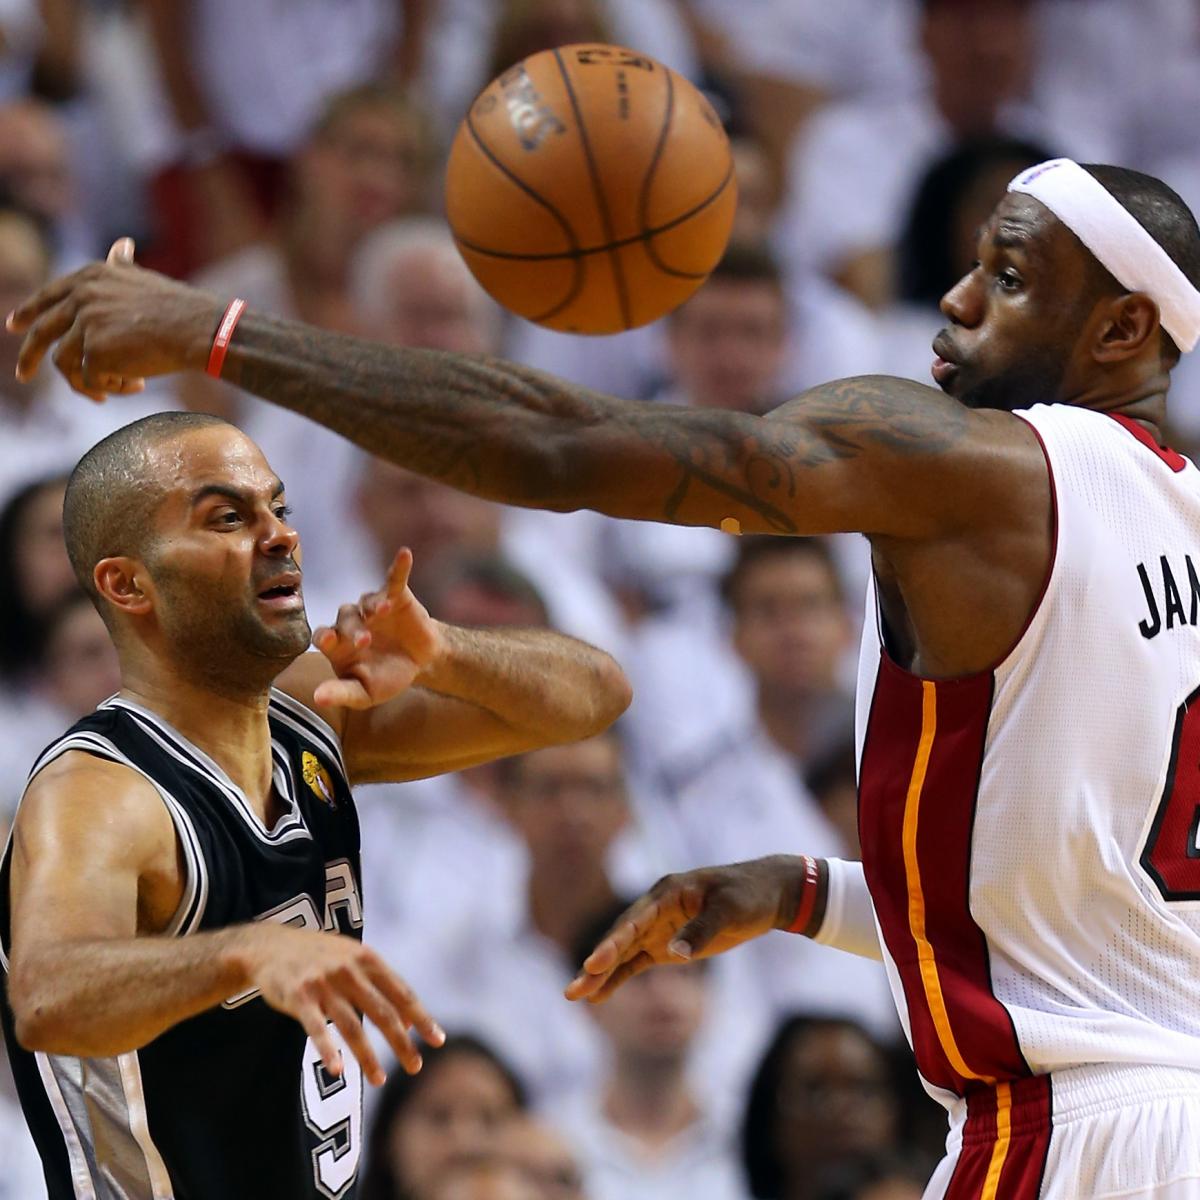 Spurs vs. Heat Game 7: Complete Viewing Guide for Epic 2013 NBA Finals Matchup ...